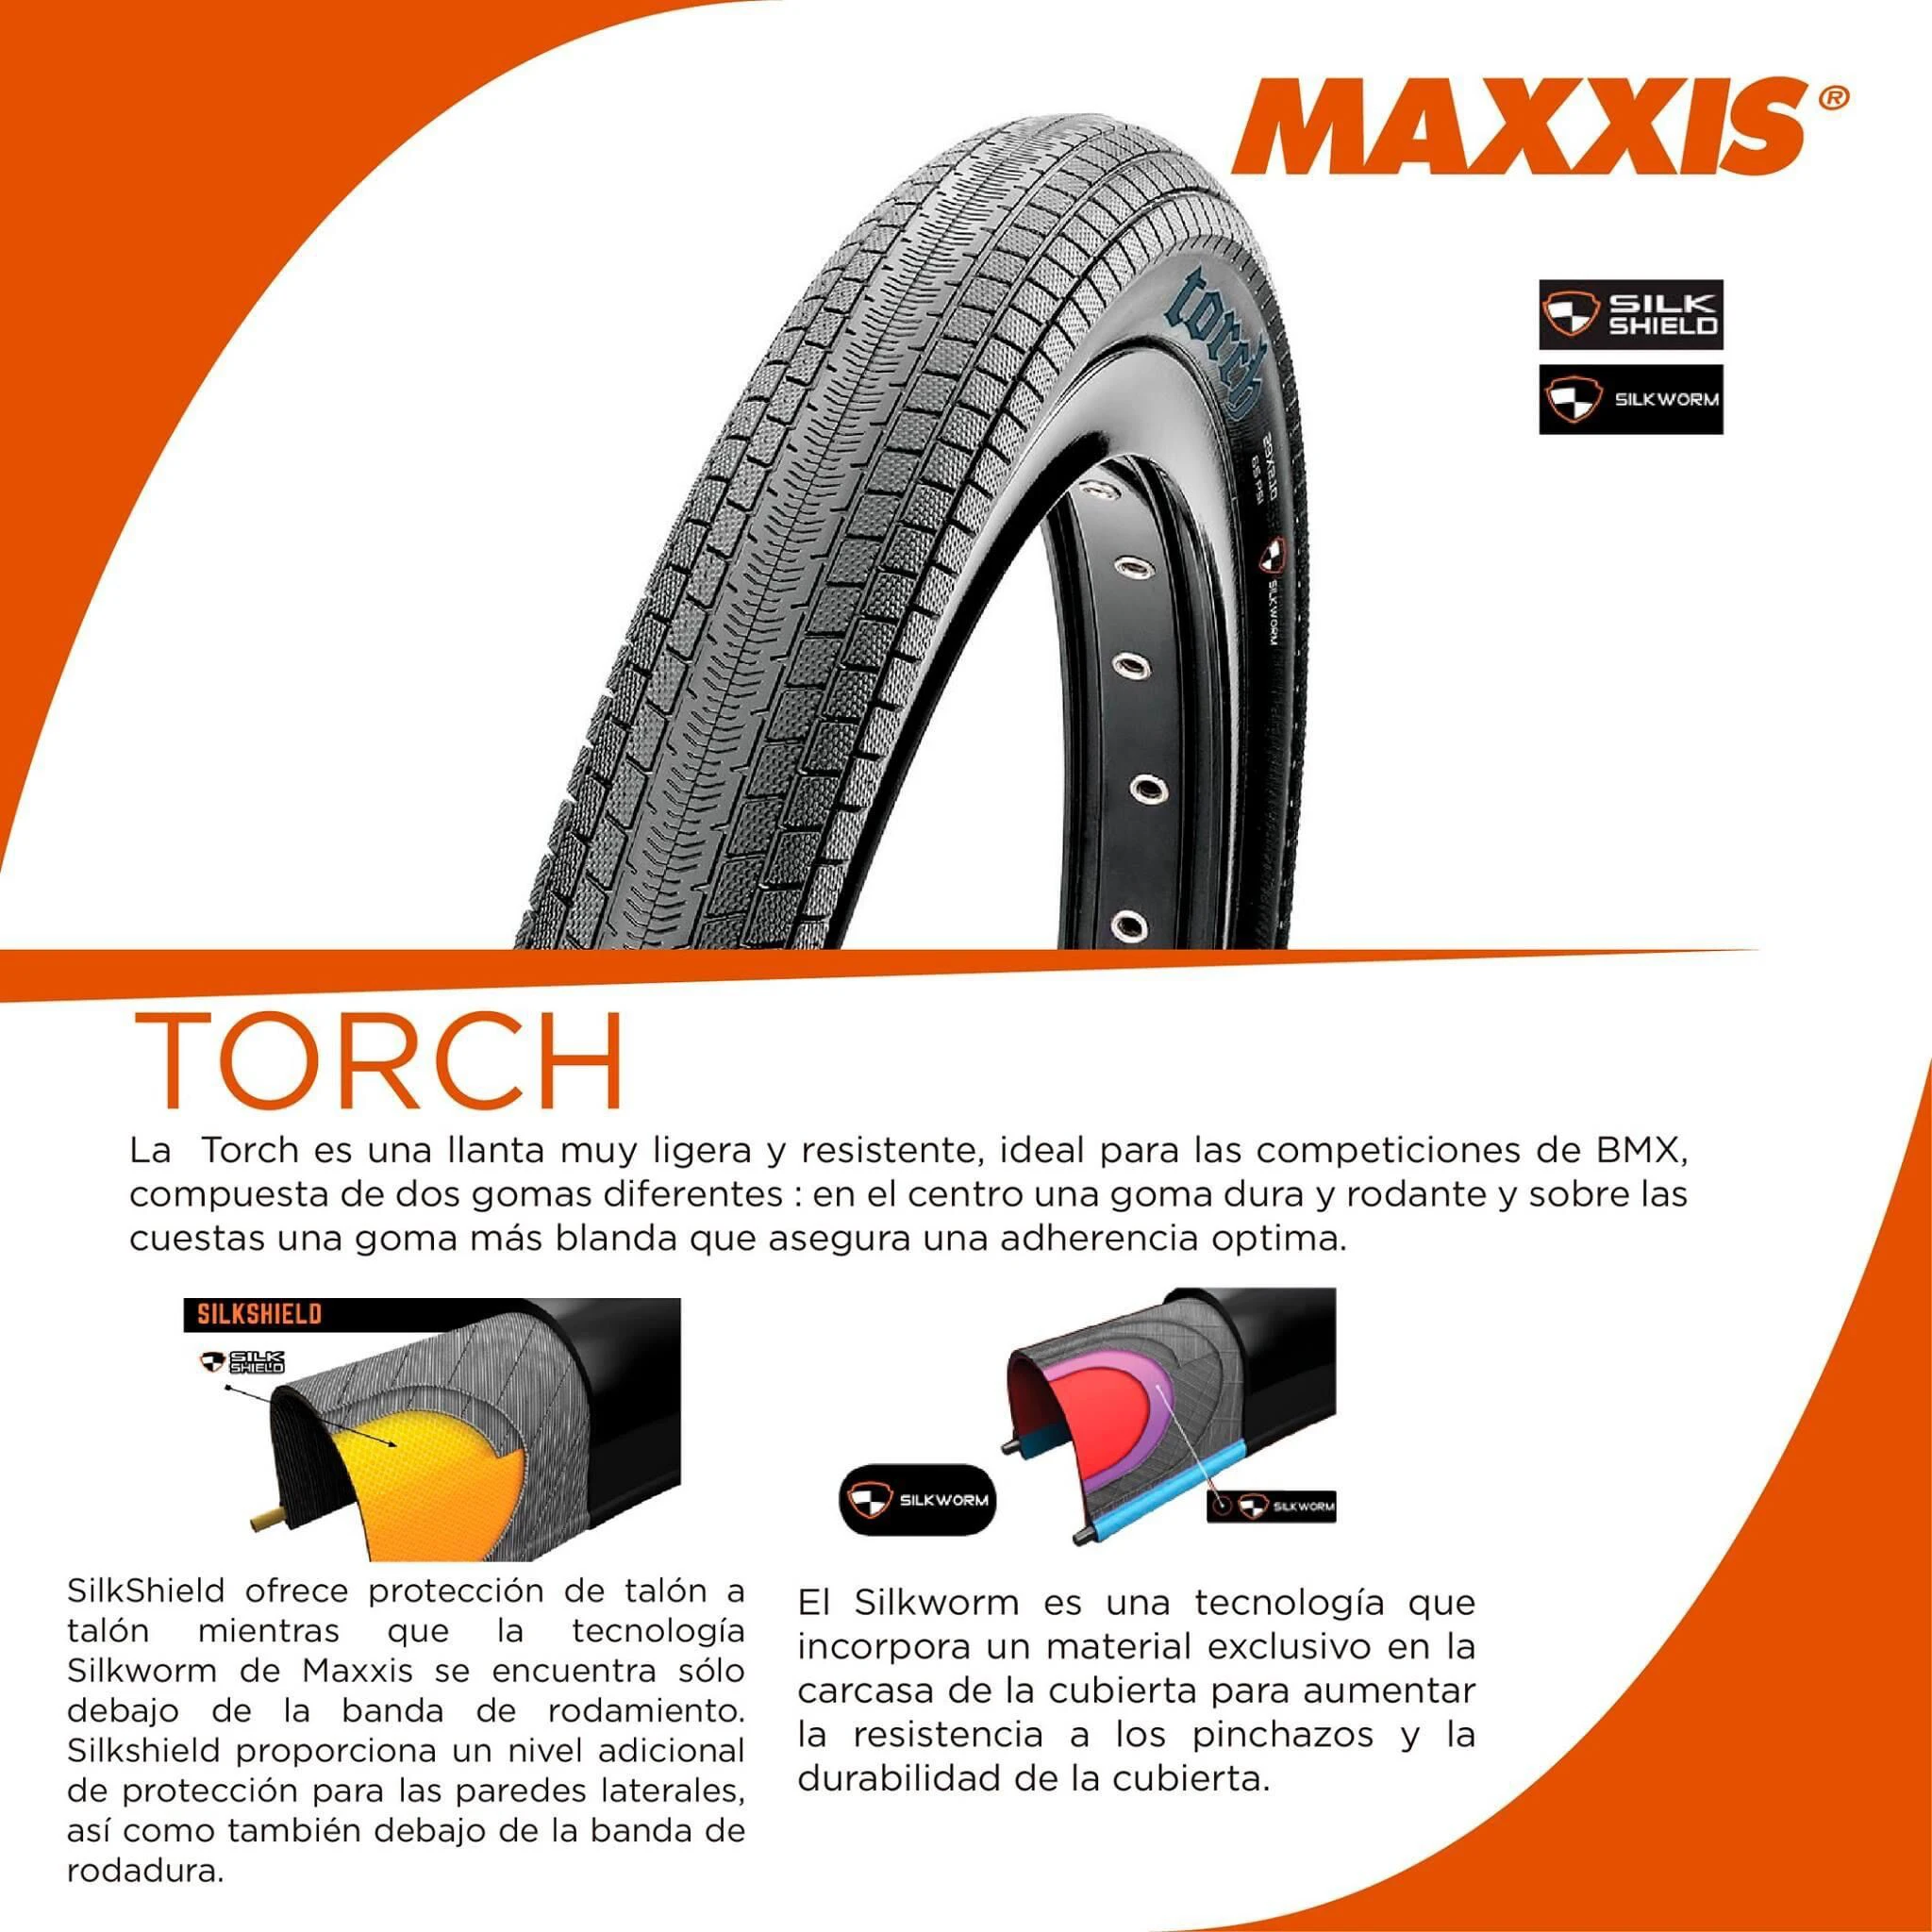 

Maxxis Torch (M149) BMX Bicycle Tire Max Torch 29x2.1 20x1.75 1.95 2.2 Bk Fold/120 Sw Bike Tires Stab-proof BMX Tyres